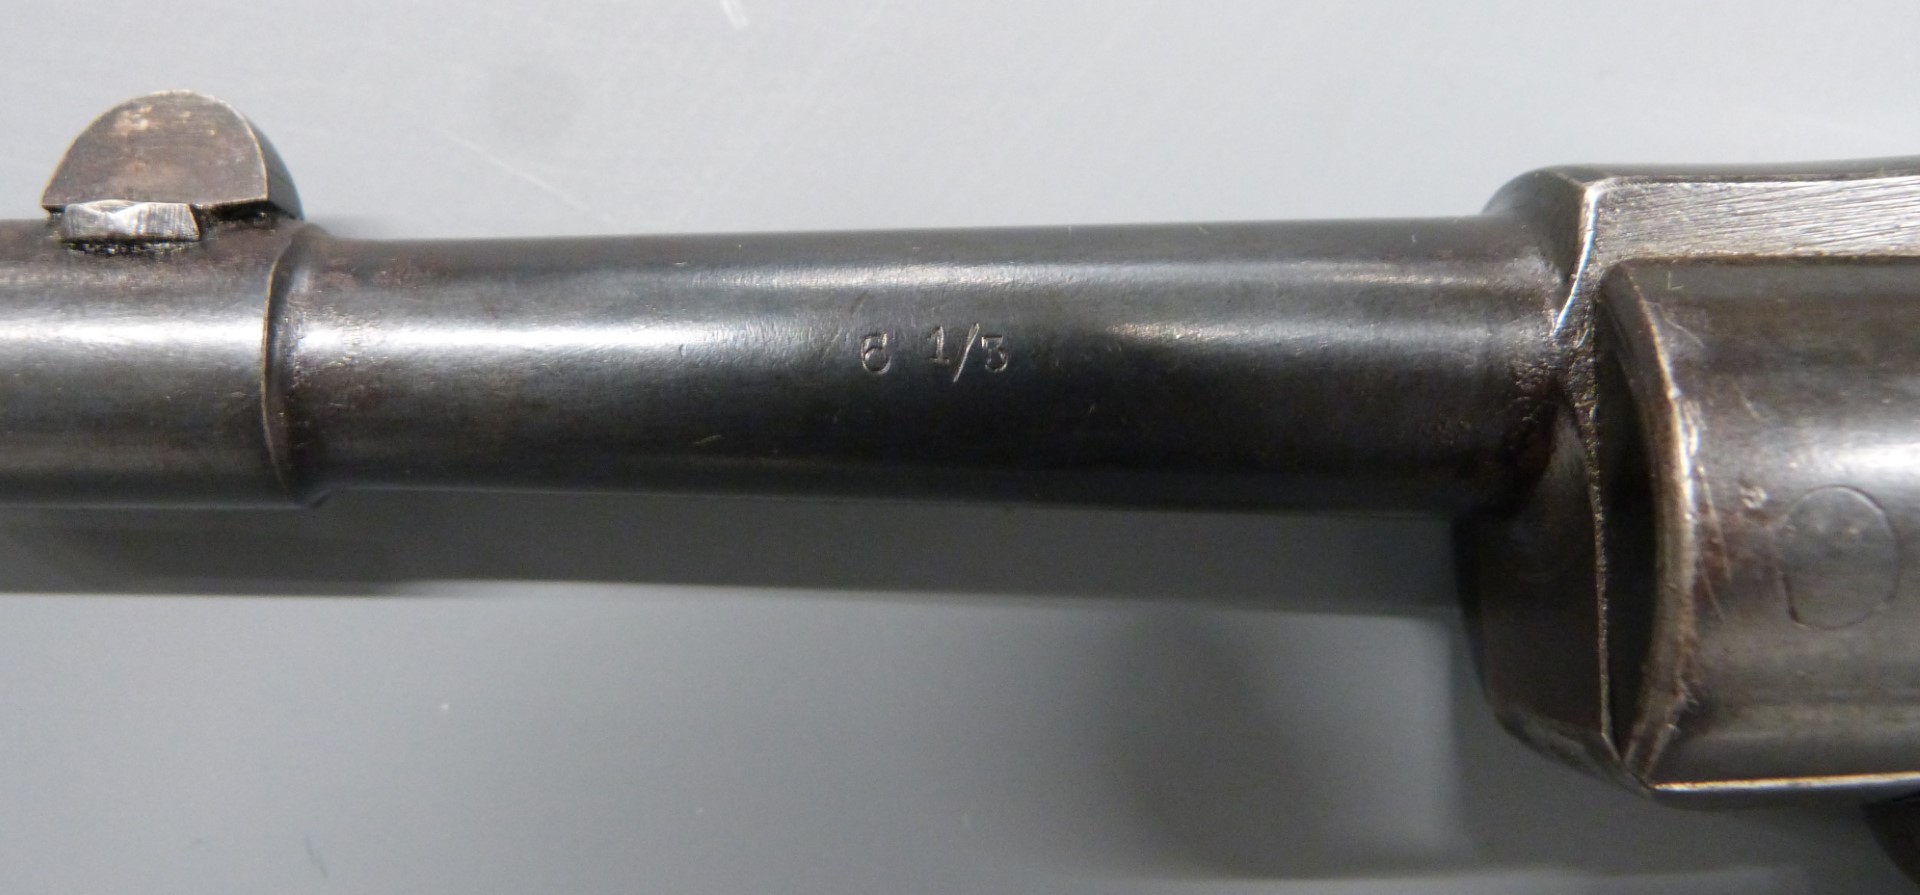 Tell Model 3 6 1/3mm air pistol with shaped and chequered Bakelite grip, inset maker's logo, top - Image 4 of 6